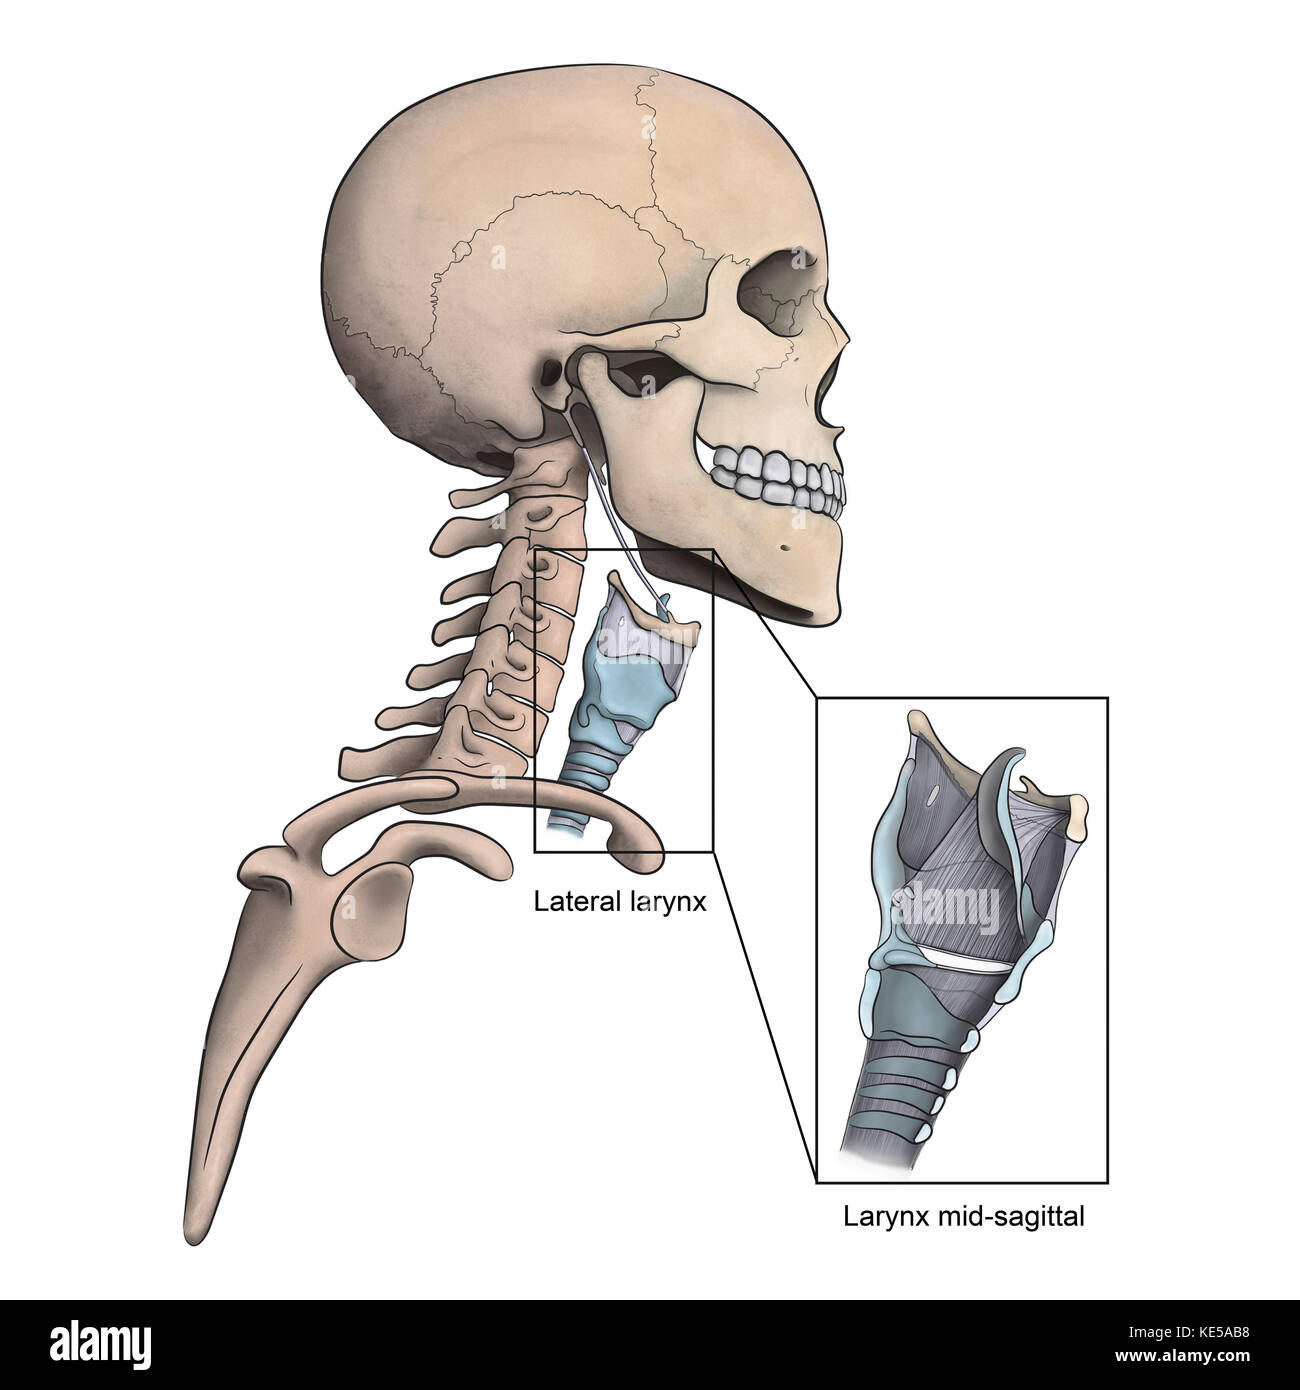 Lateral larynx and skeletal anatomy with mid-sagittal larynx view. Stock Photo